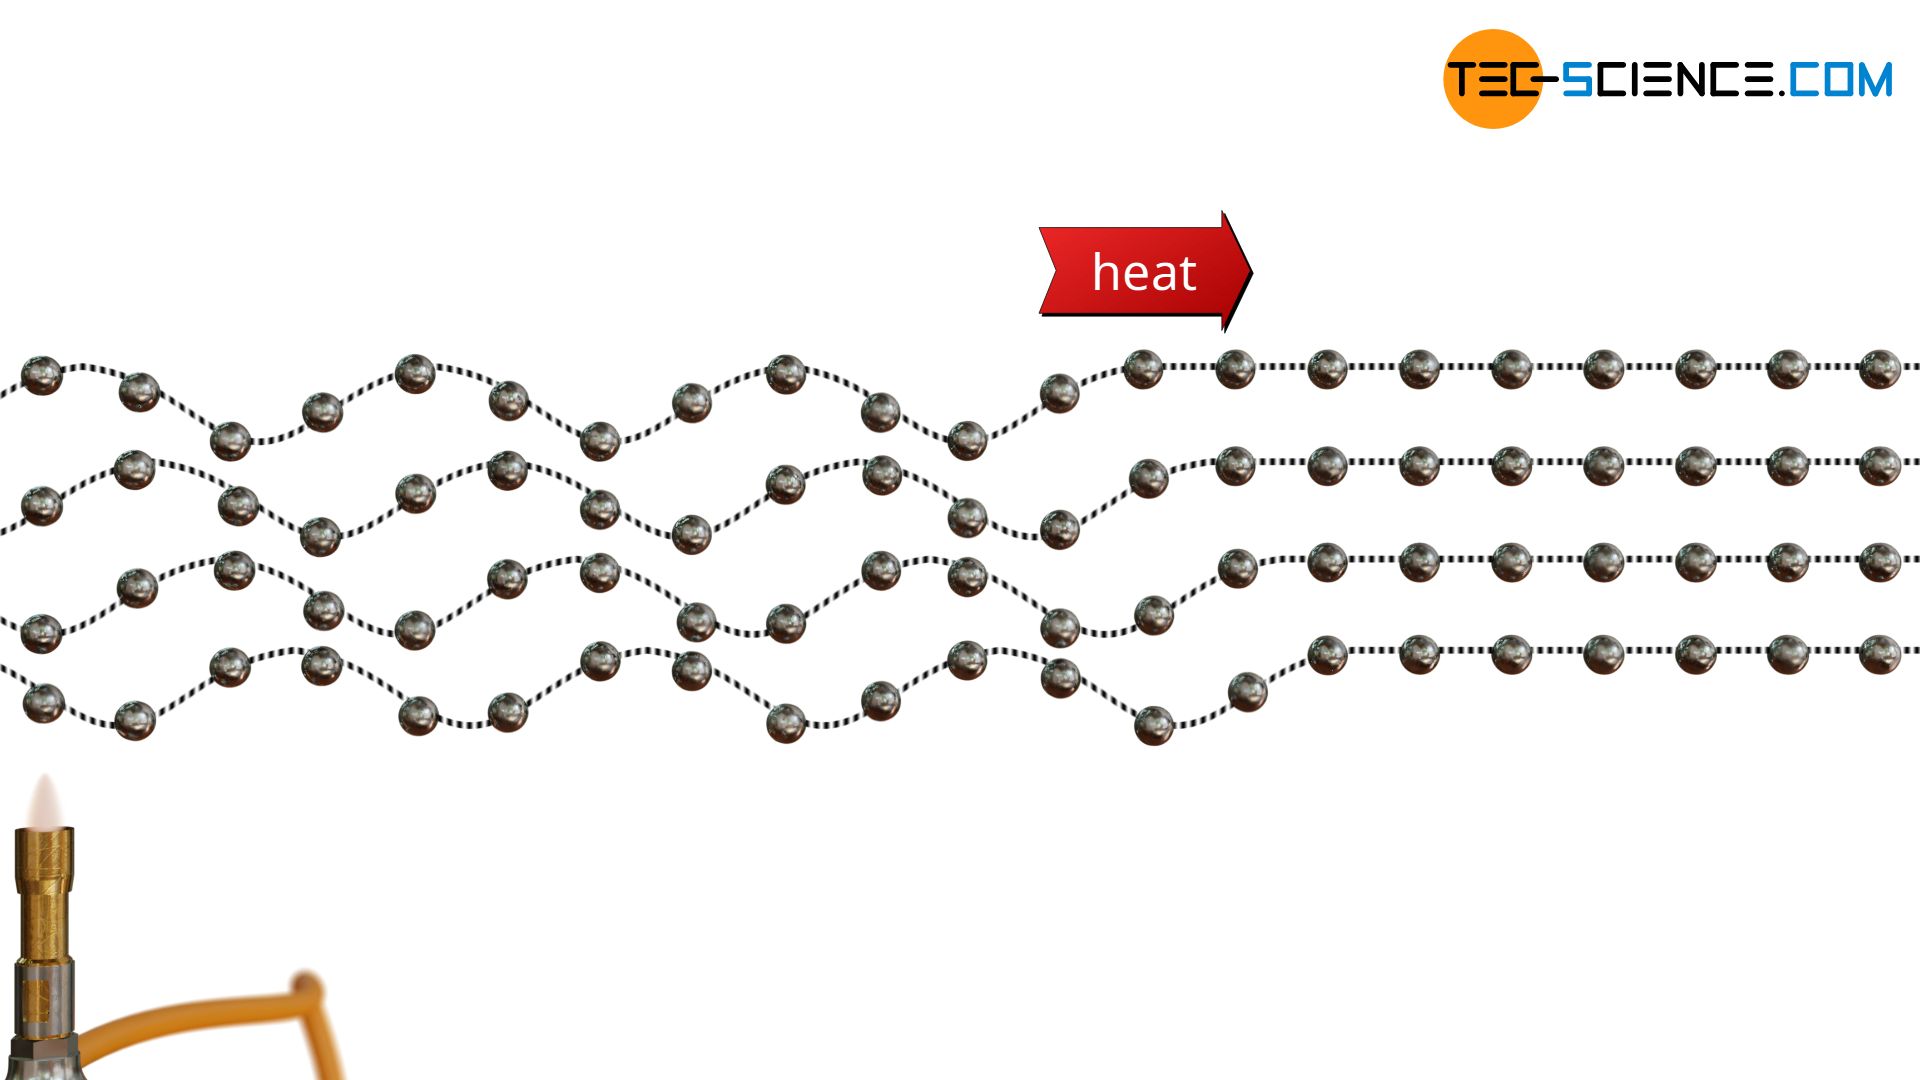 Principle of thermal conduction in solids by oscillation of the atoms